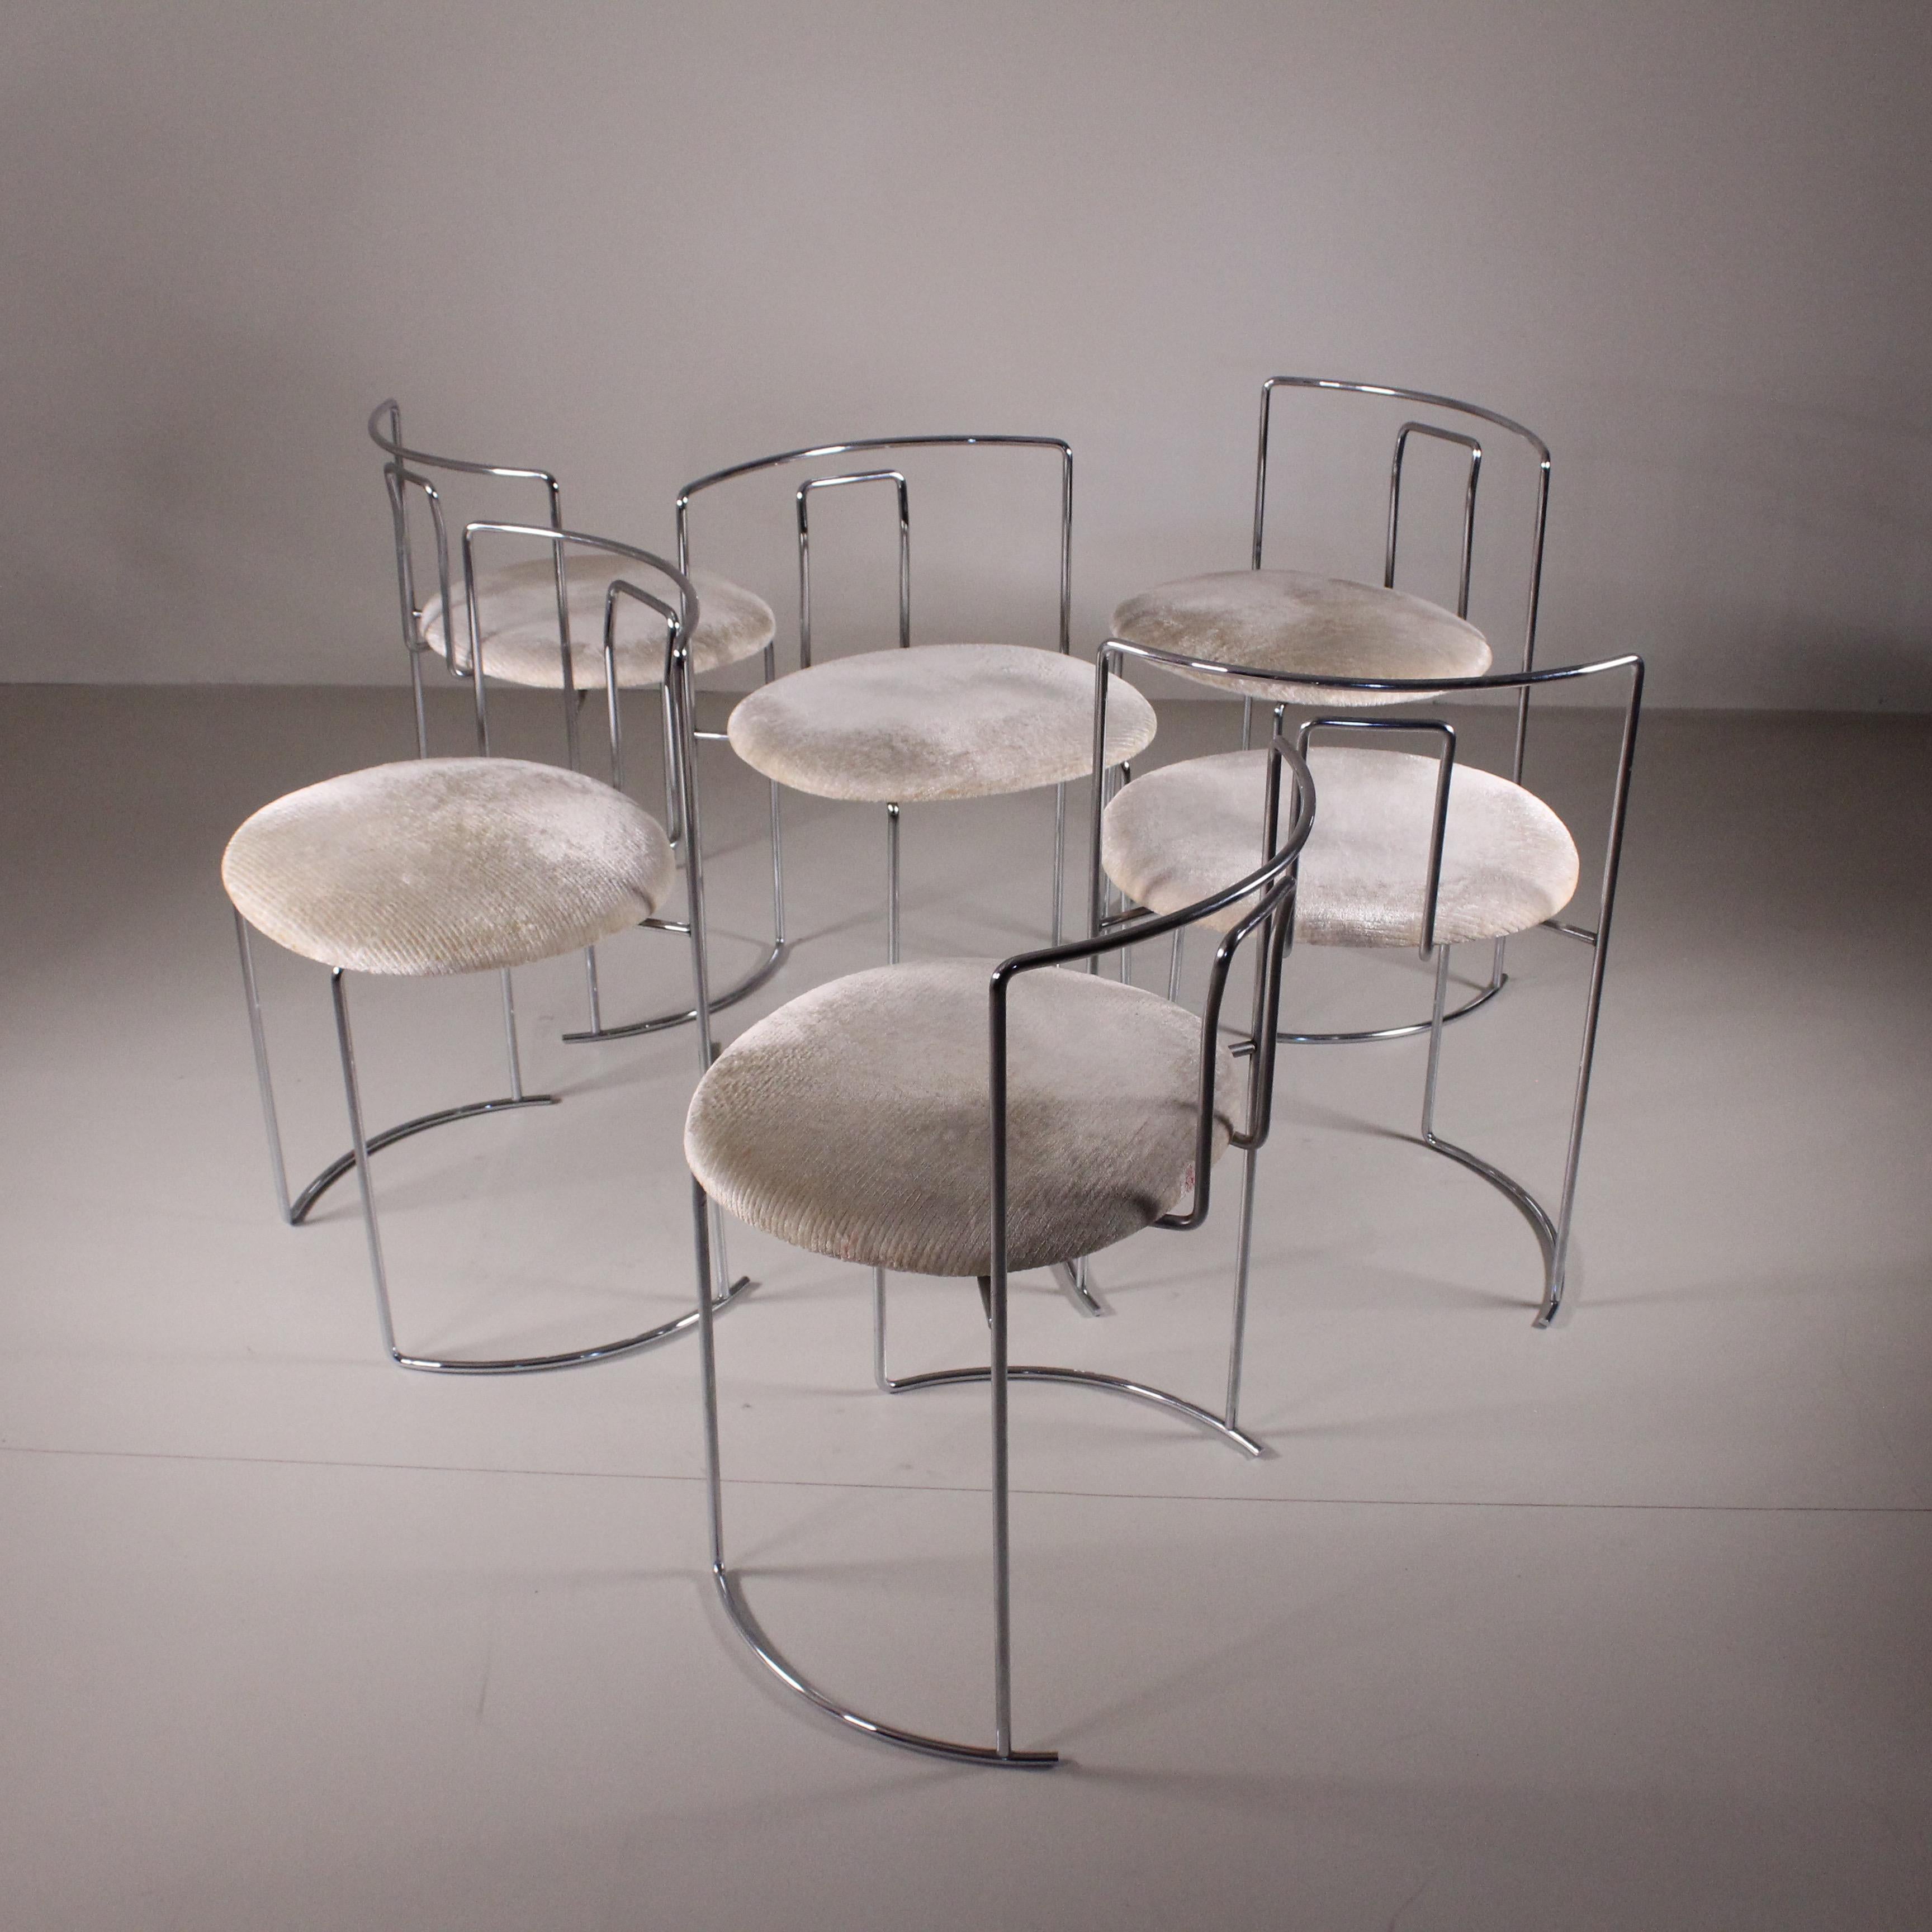 Set di 6 sedie Gaja, Kazuhide Takahama, Cassina, 1974 Circa. Kazuhide Takahama's Set of 6 Gaja Chairs, designed for Cassina in 1974, epitomizes timeless sophistication. Renowned for his minimalist approach, Takahama created a harmonious blend of